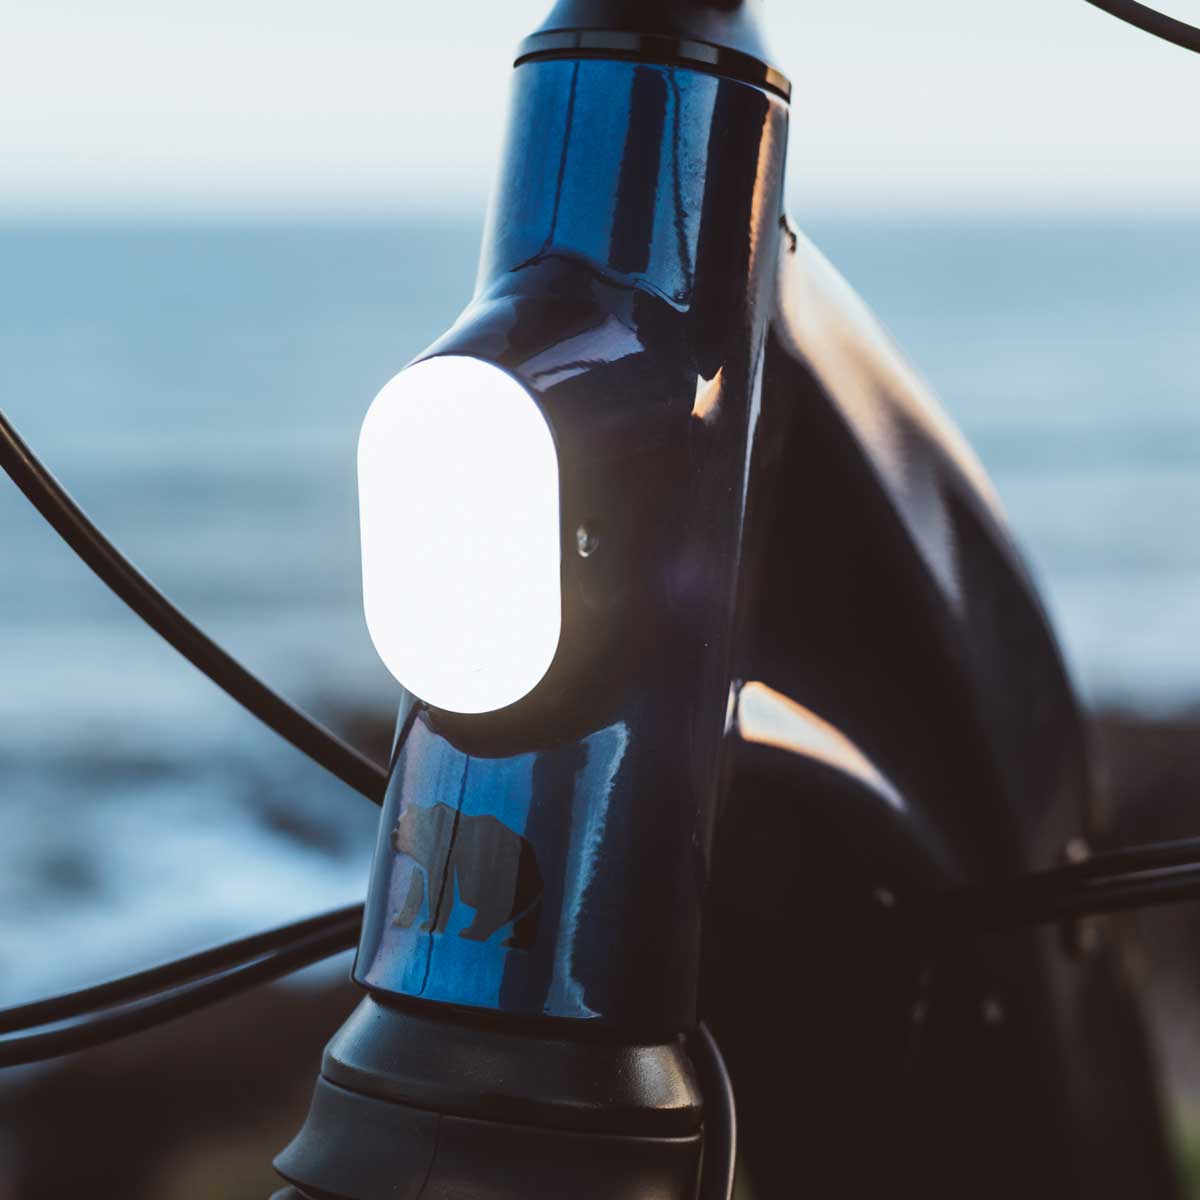 A close-up photo of the front light of a Kuma S2 electric bike.